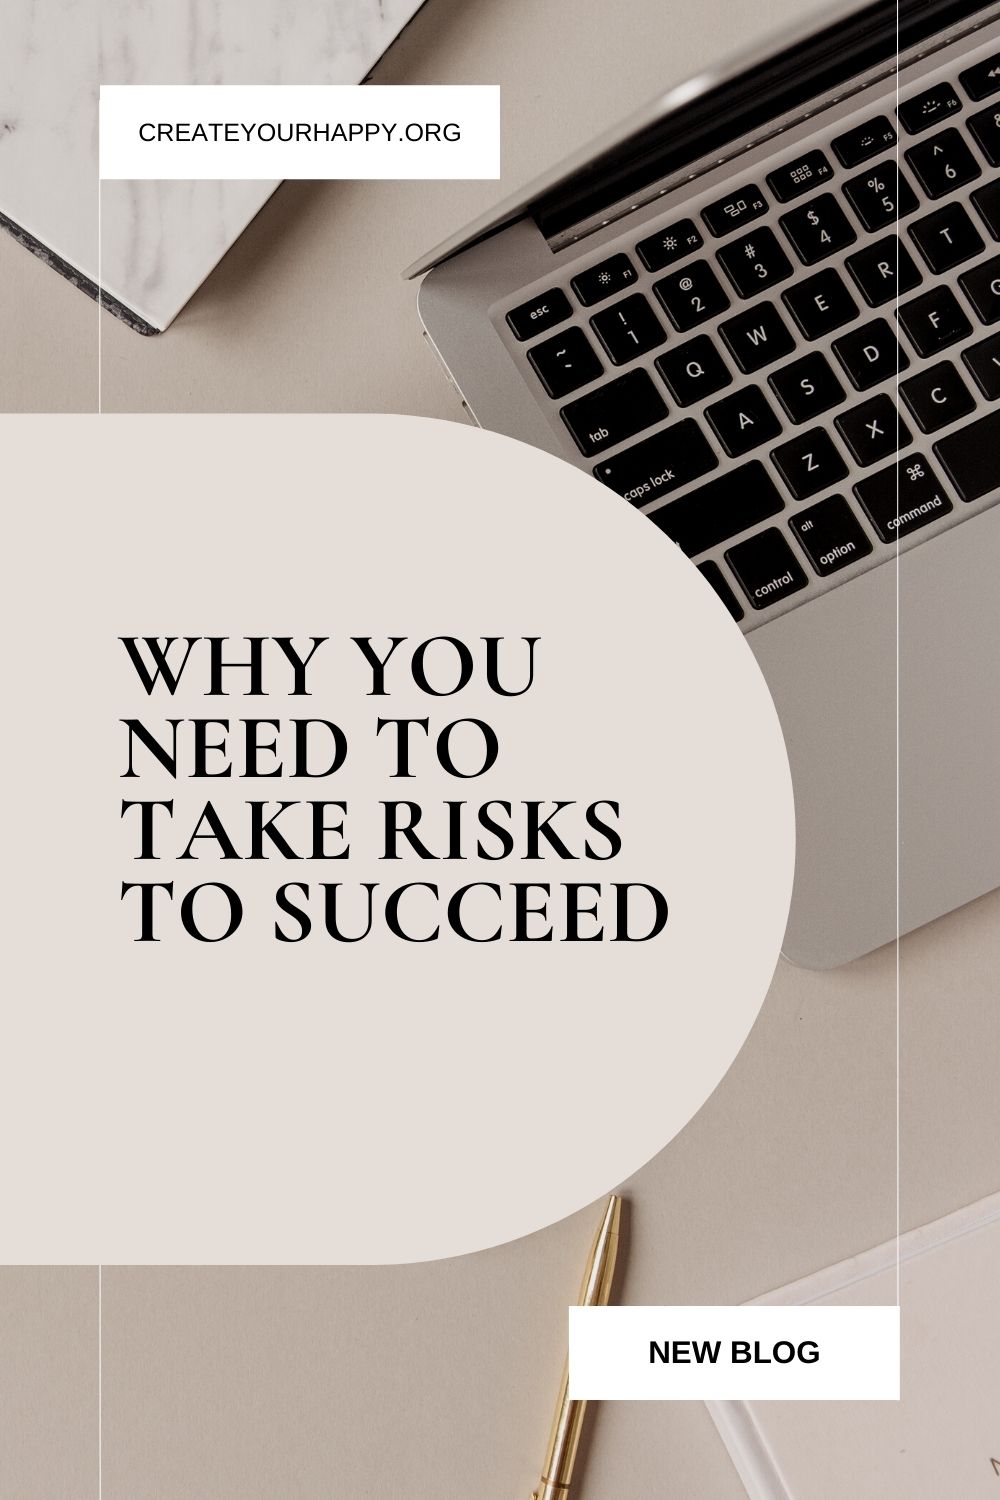 Why You Need to Take Risks to Succeed